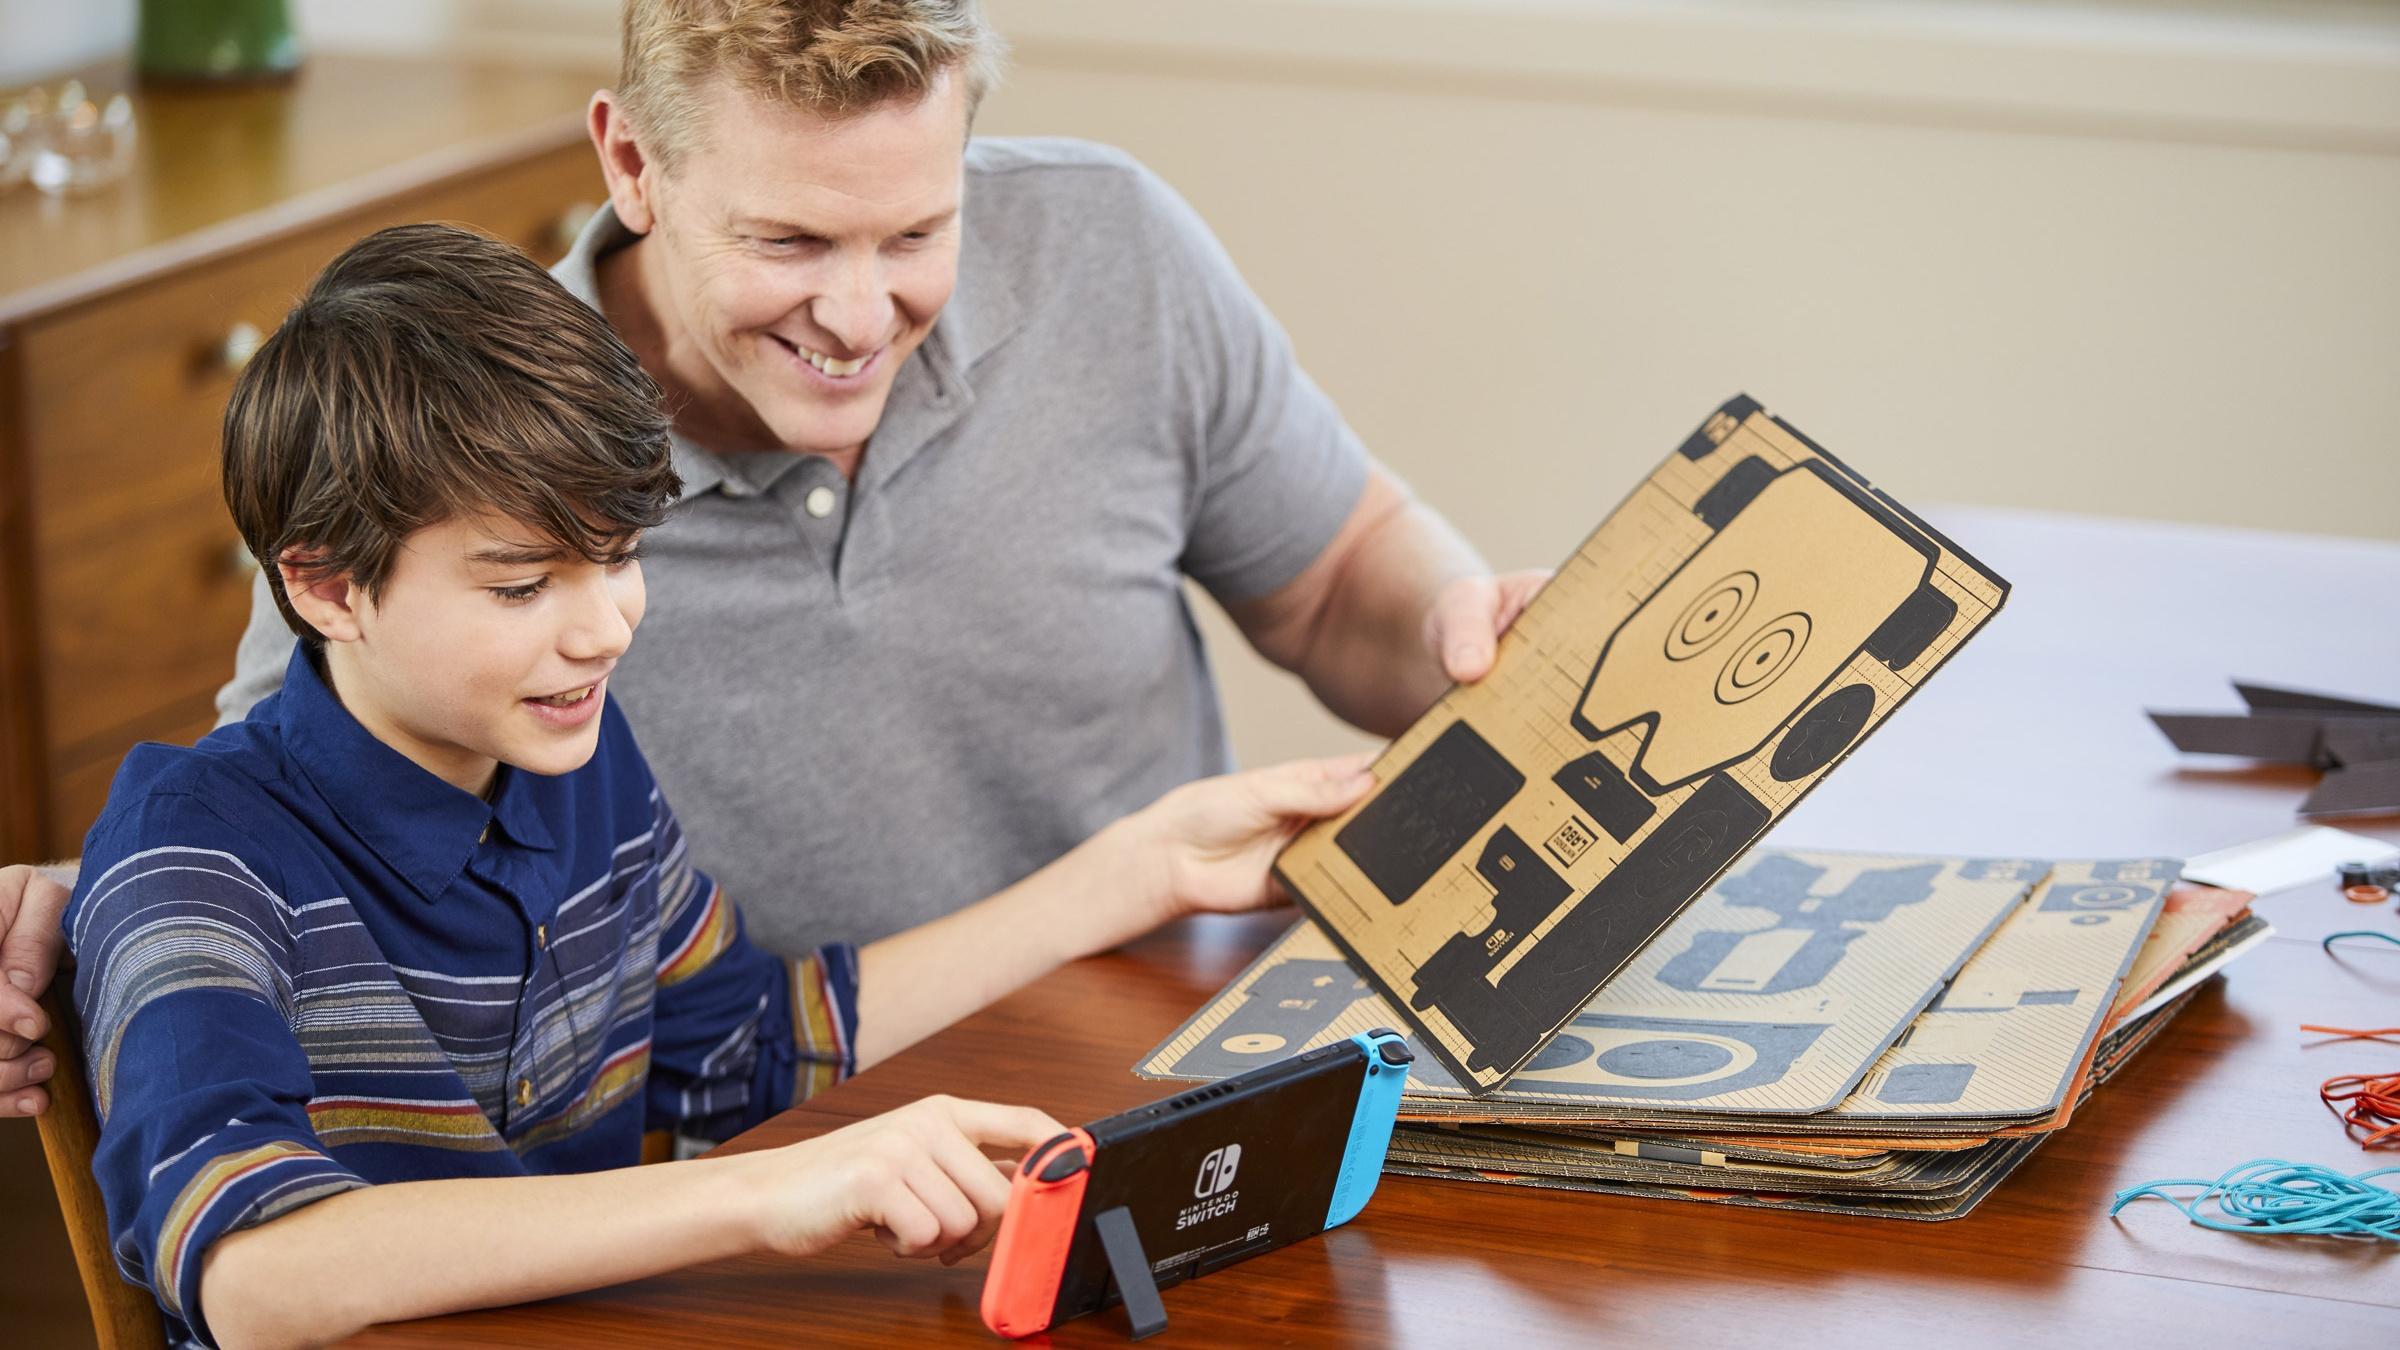 Forget VR and AR, Nintendo Labo puts the future in your hands